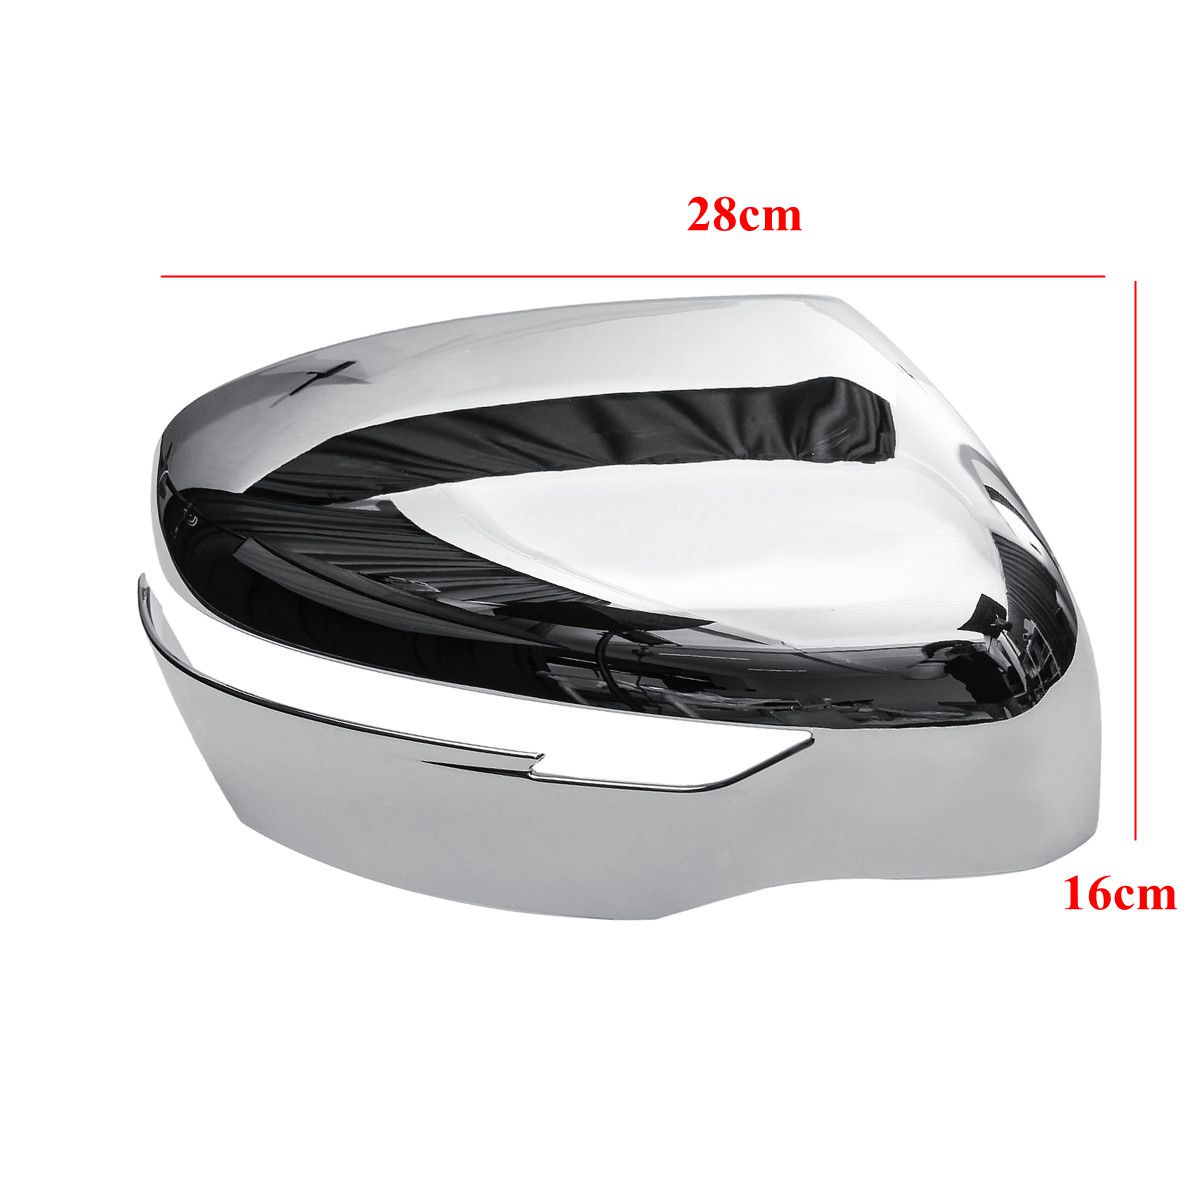 Car-Chrome-Styling-Rearview-Mirror-for-Nissan-Qashqai-J11-Rogue-X-Trail-T32-2014-2015-2016-2017-1351140